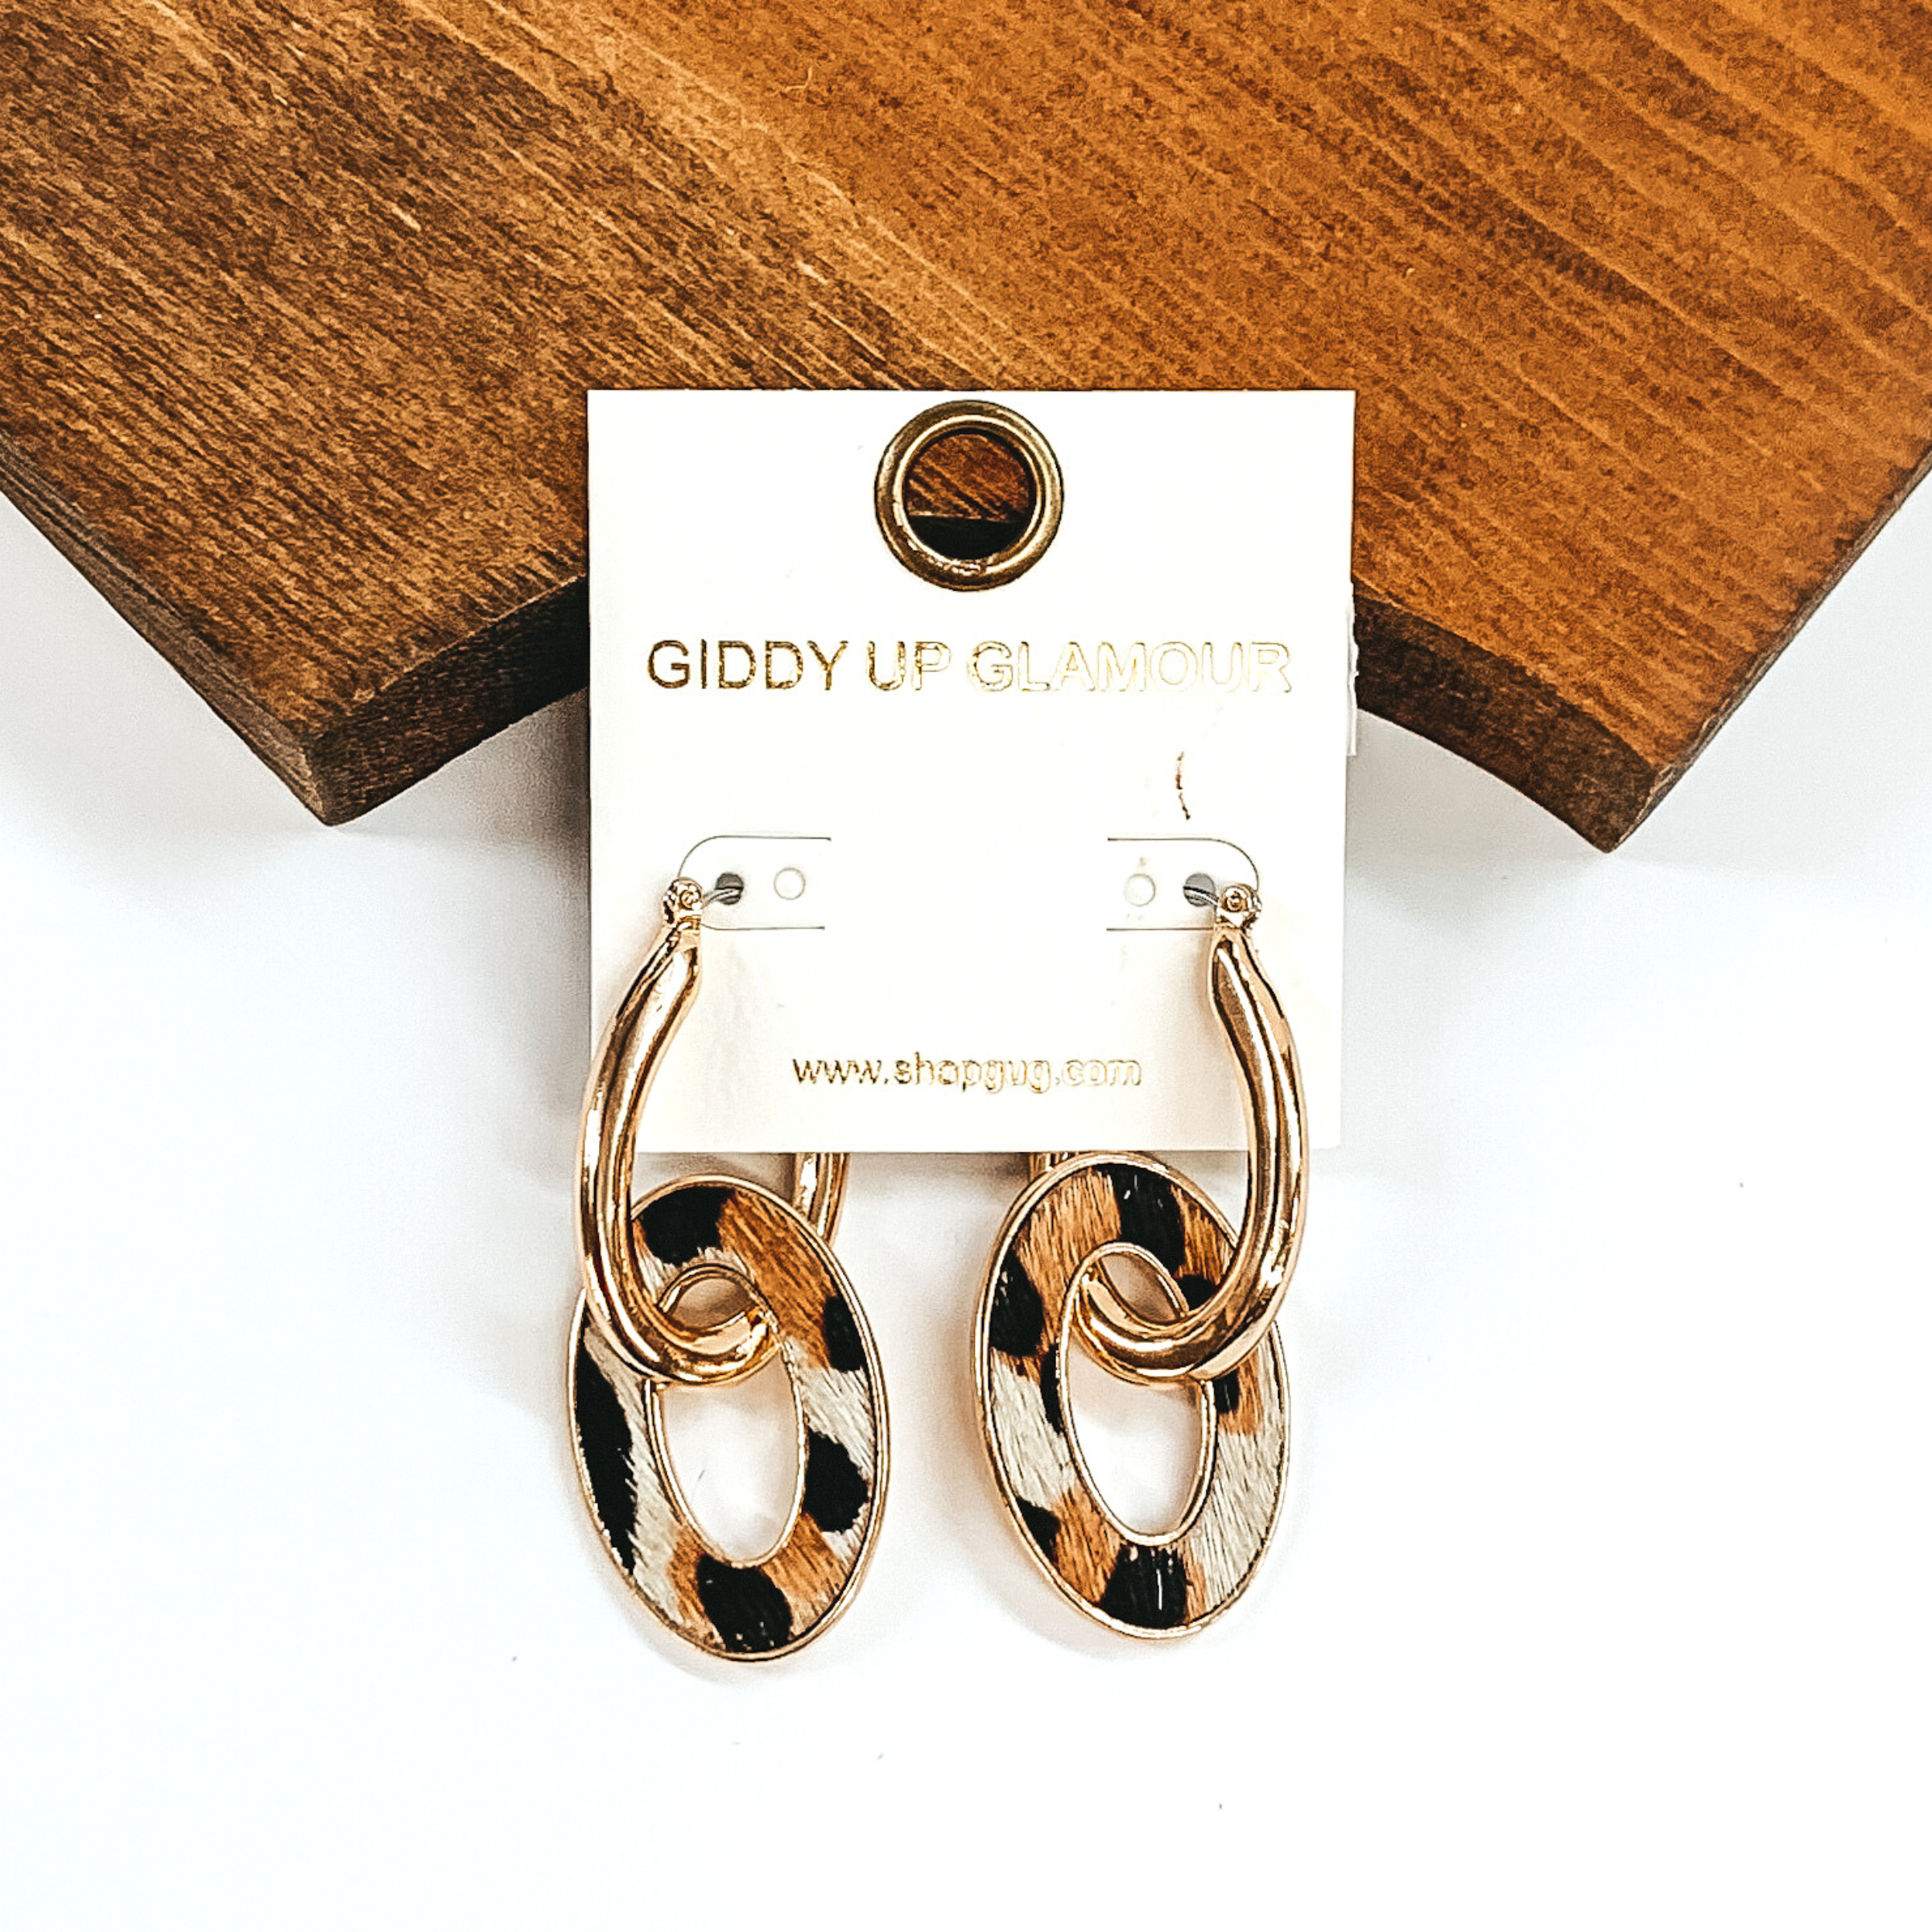 Gold oval hoop earrings with another oval link hanging. The hanging oval has a white hide inlay that has a black and brown animal print. These earrings are pictured laying against some brown wood on a white background.  